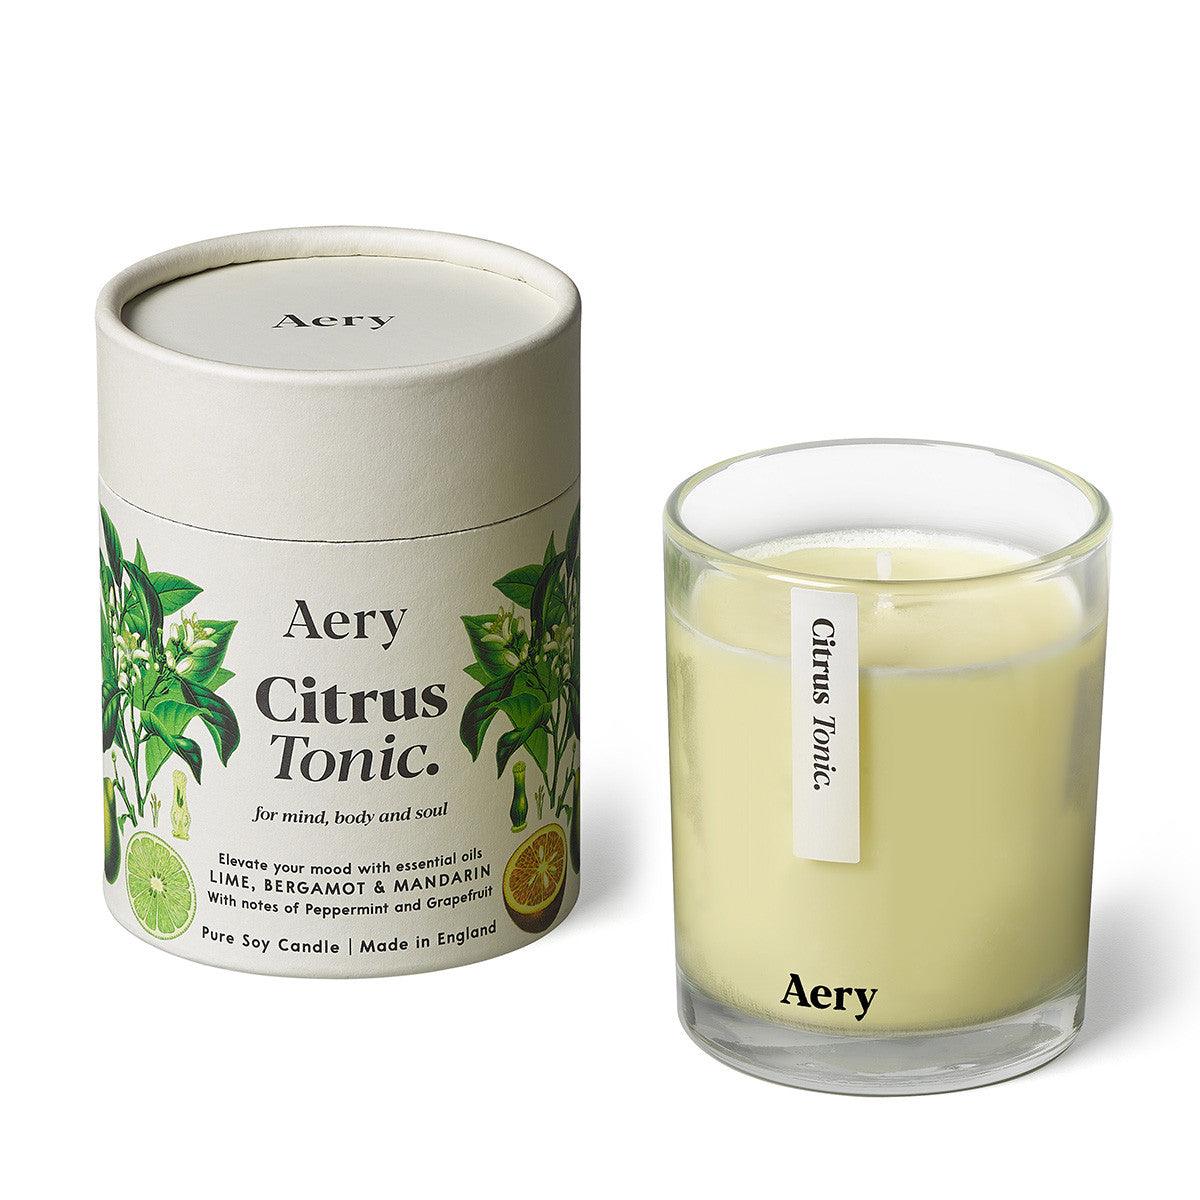 Aery Living Botanical 200g Soy Candle - Citrus Tonic | Scented Candles | Candle Fragrances | Soy Candles | Newcastle Candles | Best Candles | Nice Candles | Gifts | Best Gifts | Wax Candles | Mothers Day Gifts | Christmas Gifts | Candles Australia | Candle Shop | Presents | Sydney Candles | Brisbane Candles | Queensland Candles | Darwin Candles | Broom Candles | Soy Wax | Accepts Bitcoin | Candles Online | Accepts Crypto currency | Upcycle Studio